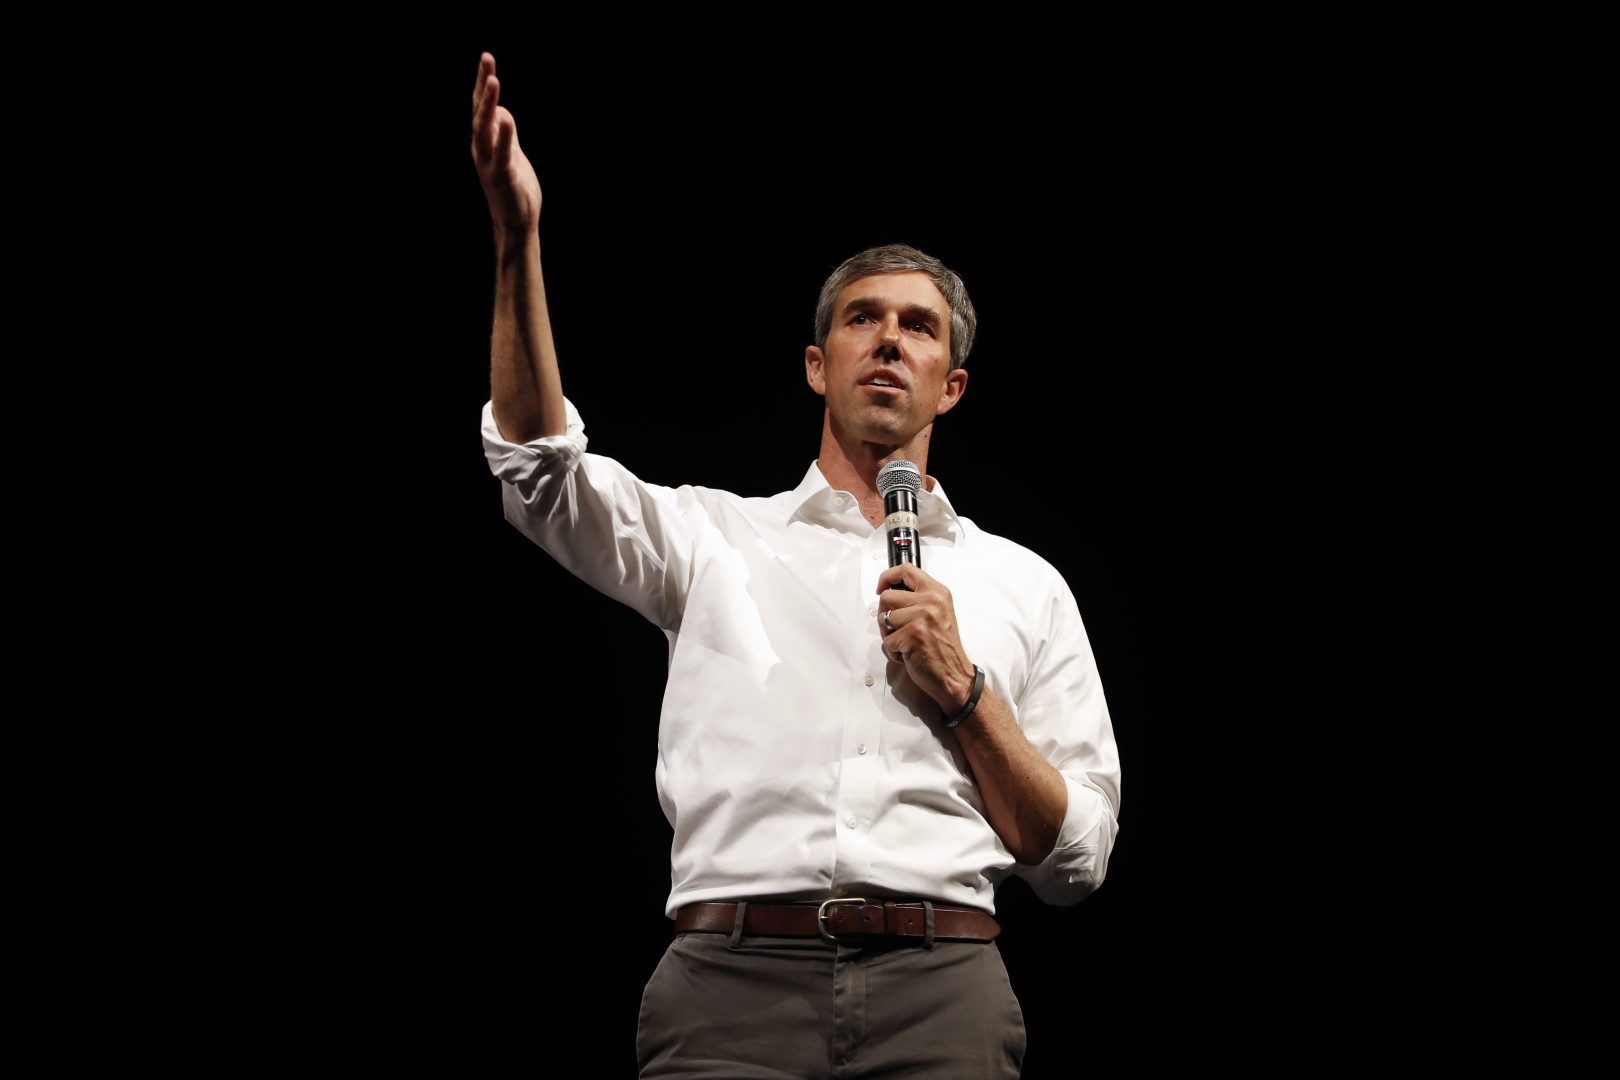 Democratic presidential candidate former Texas Rep. Beto O'Rourke speaks during a town hall event at Tufts University Thursday, Sept. 5, 2019, in Medford, Mass.